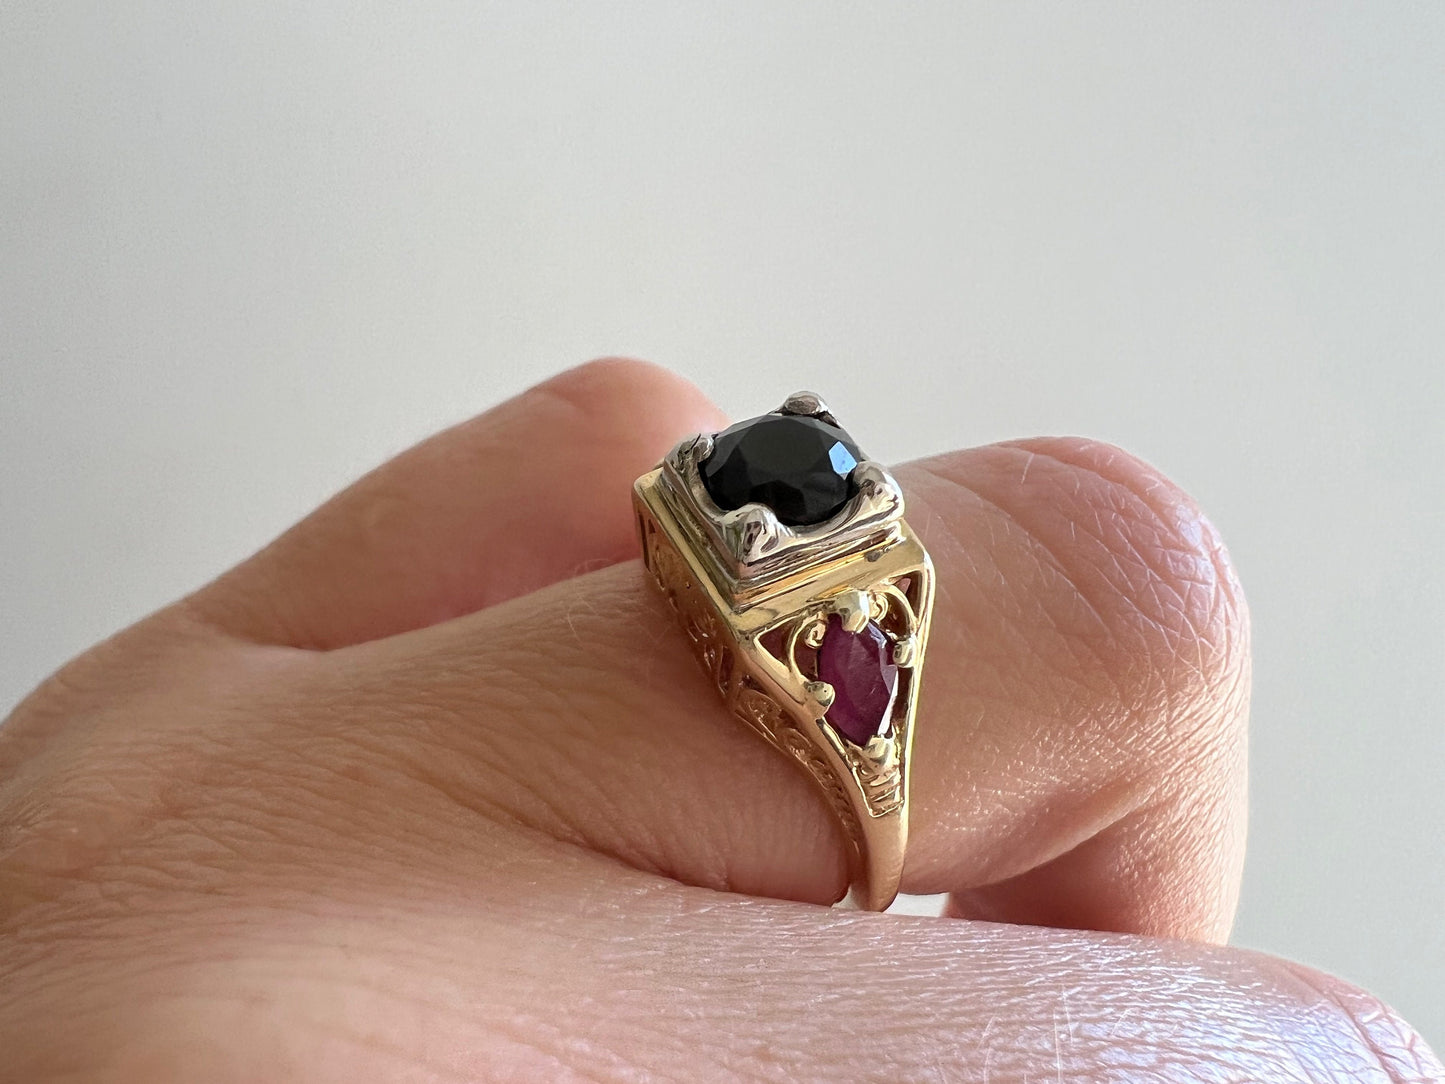 reimagined V I N T A G E // 1960s does 1920s / 14k deco revival engagement ring / yellow and white gold with black onyx and rubies / size 5